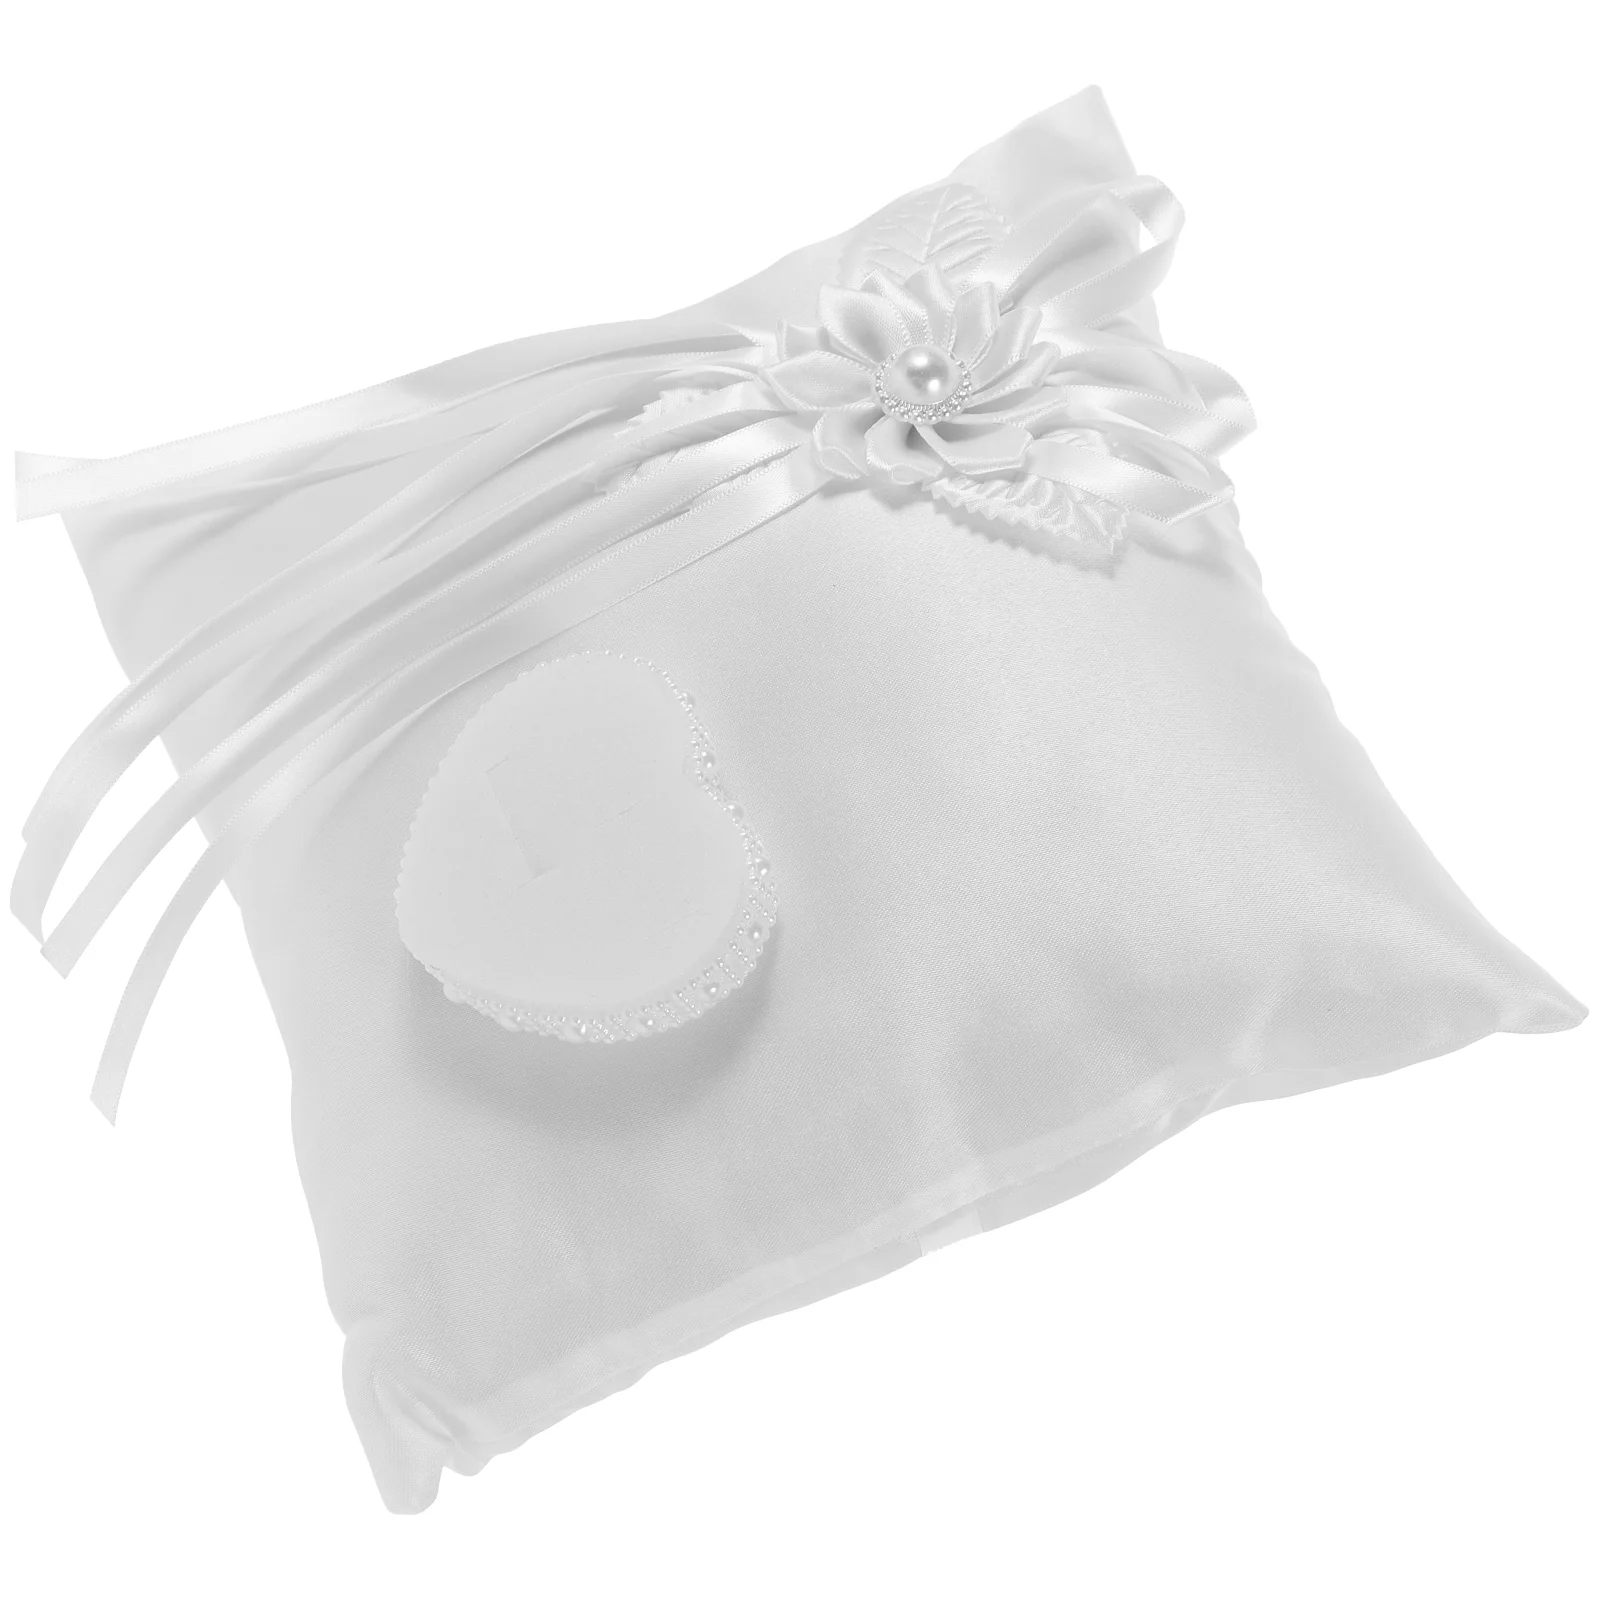 

Ring Pillow Wedding Bearer Cushion Holder Pillows Bridal Lace Box Flower Engagement Pearl Ceremony Jewelry Satin Square White